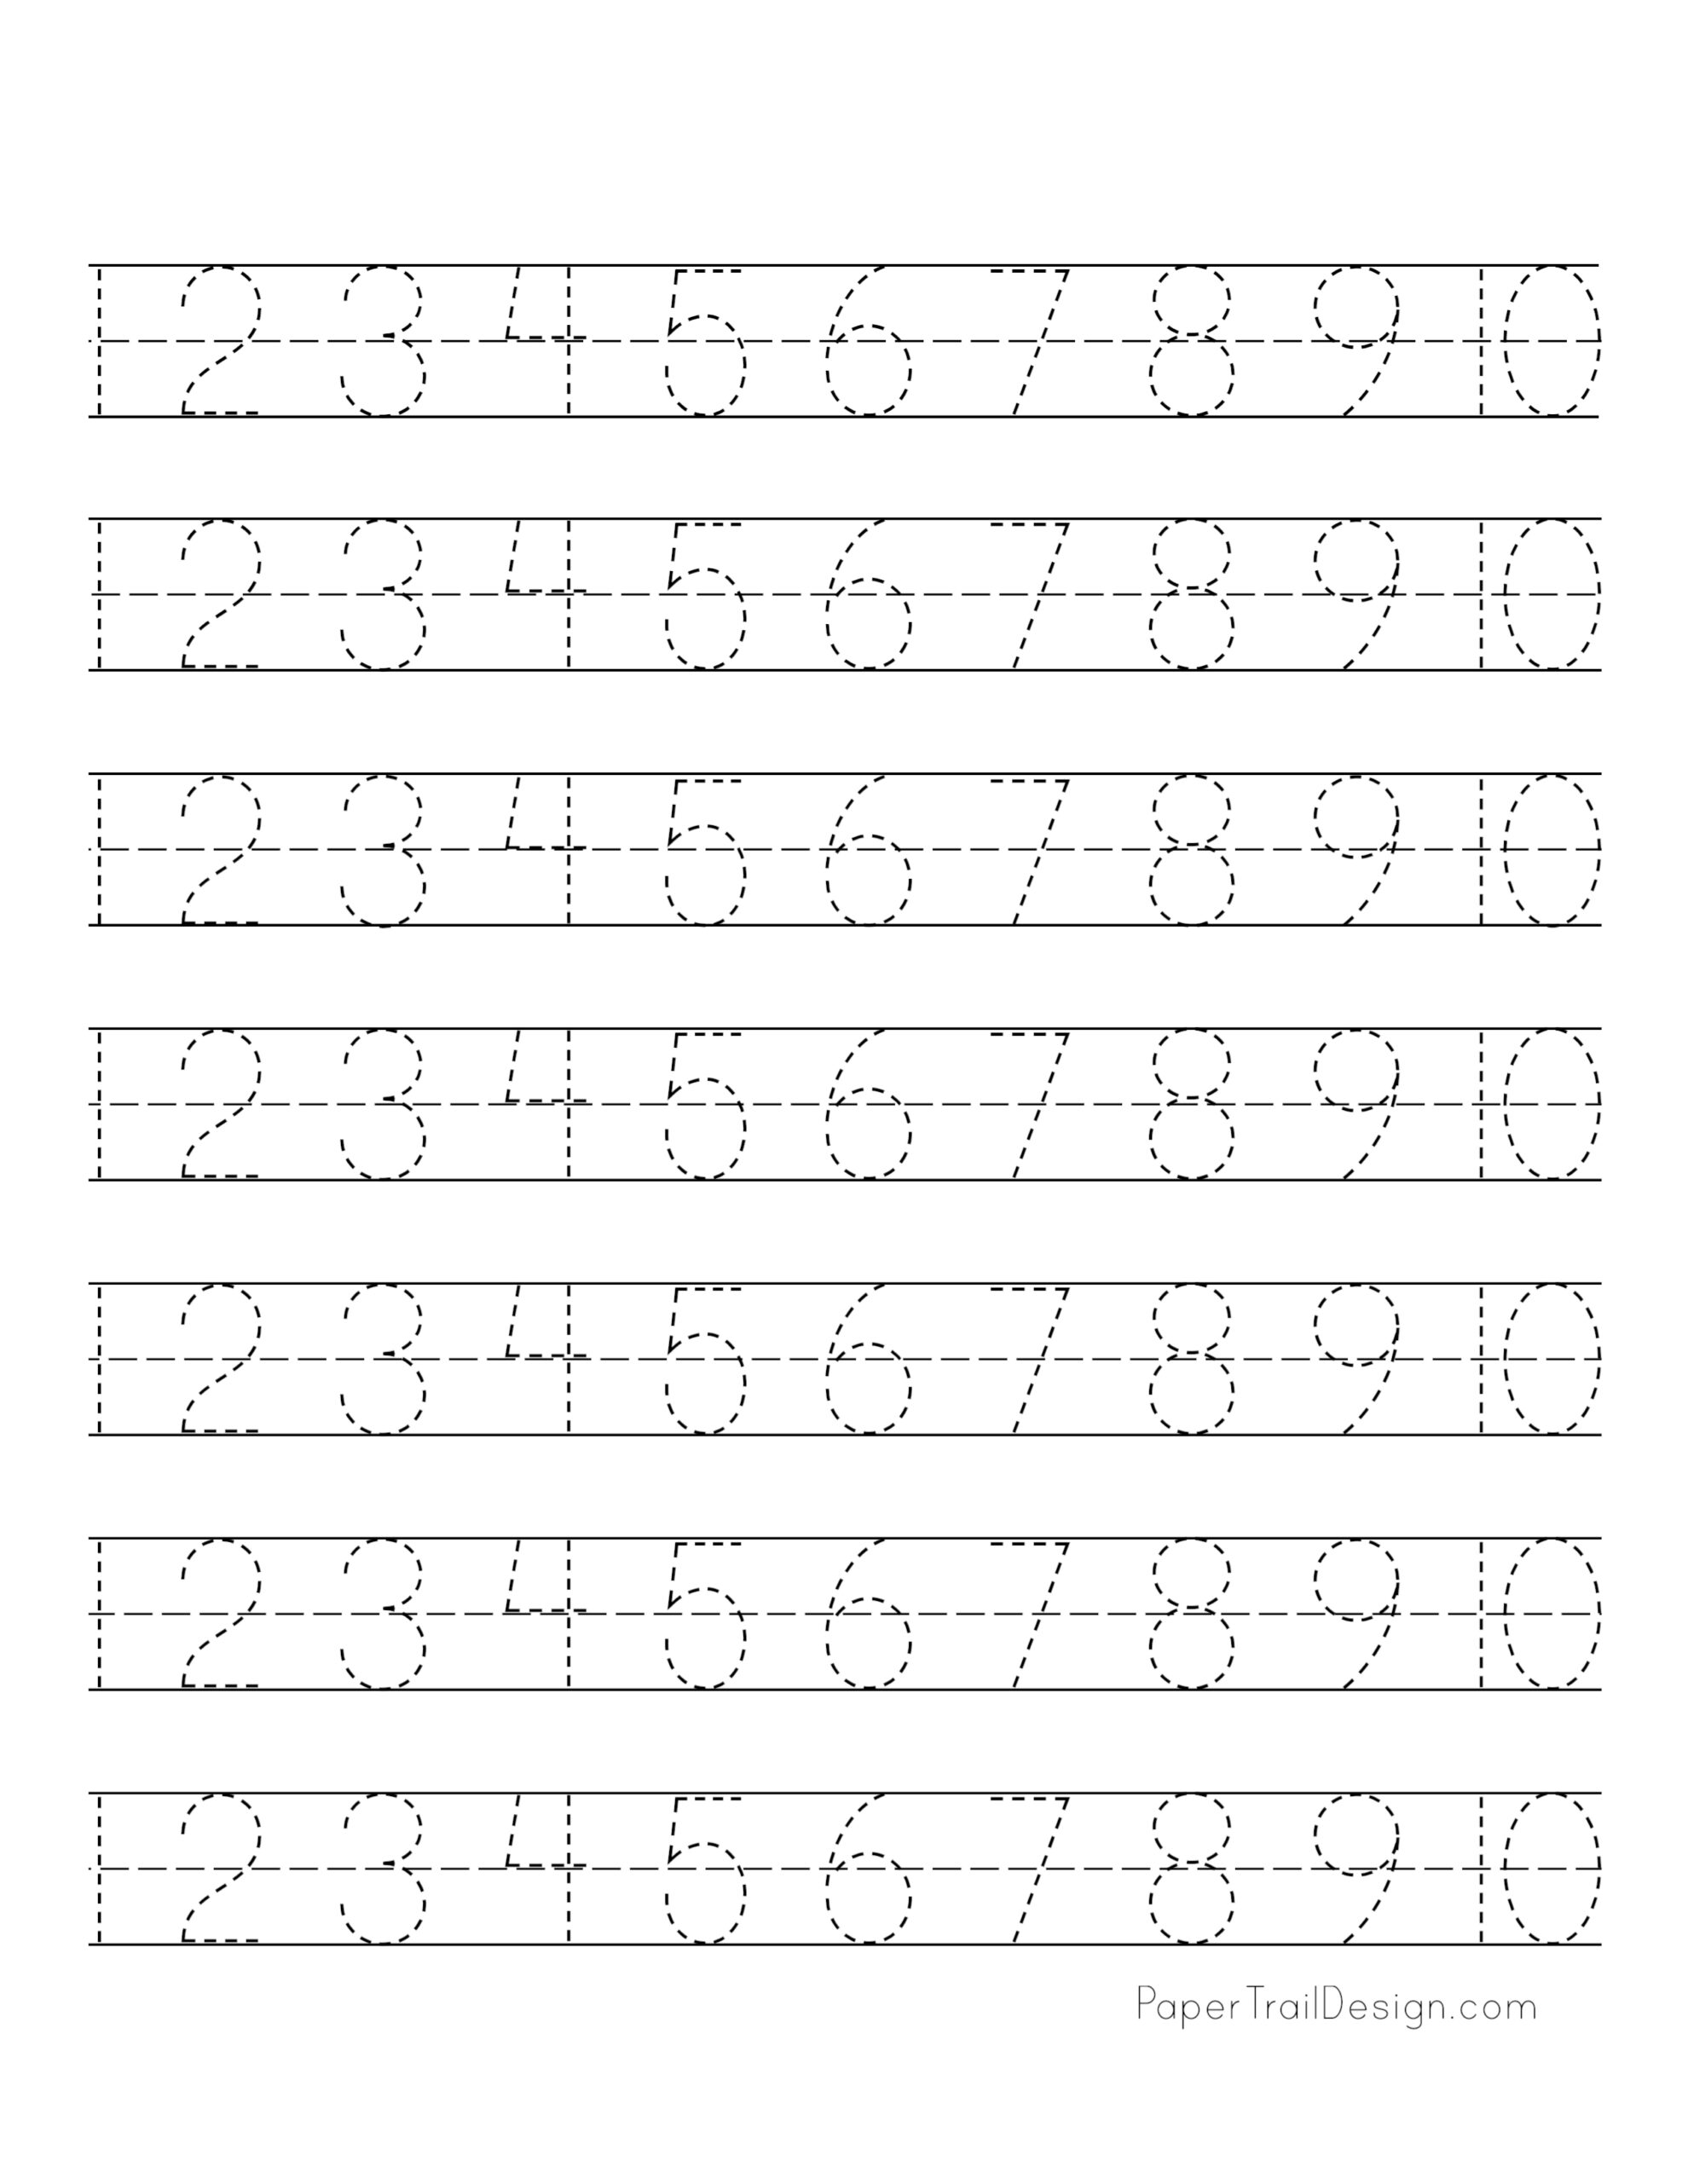 free-printable-number-pages-printable-form-templates-and-letter